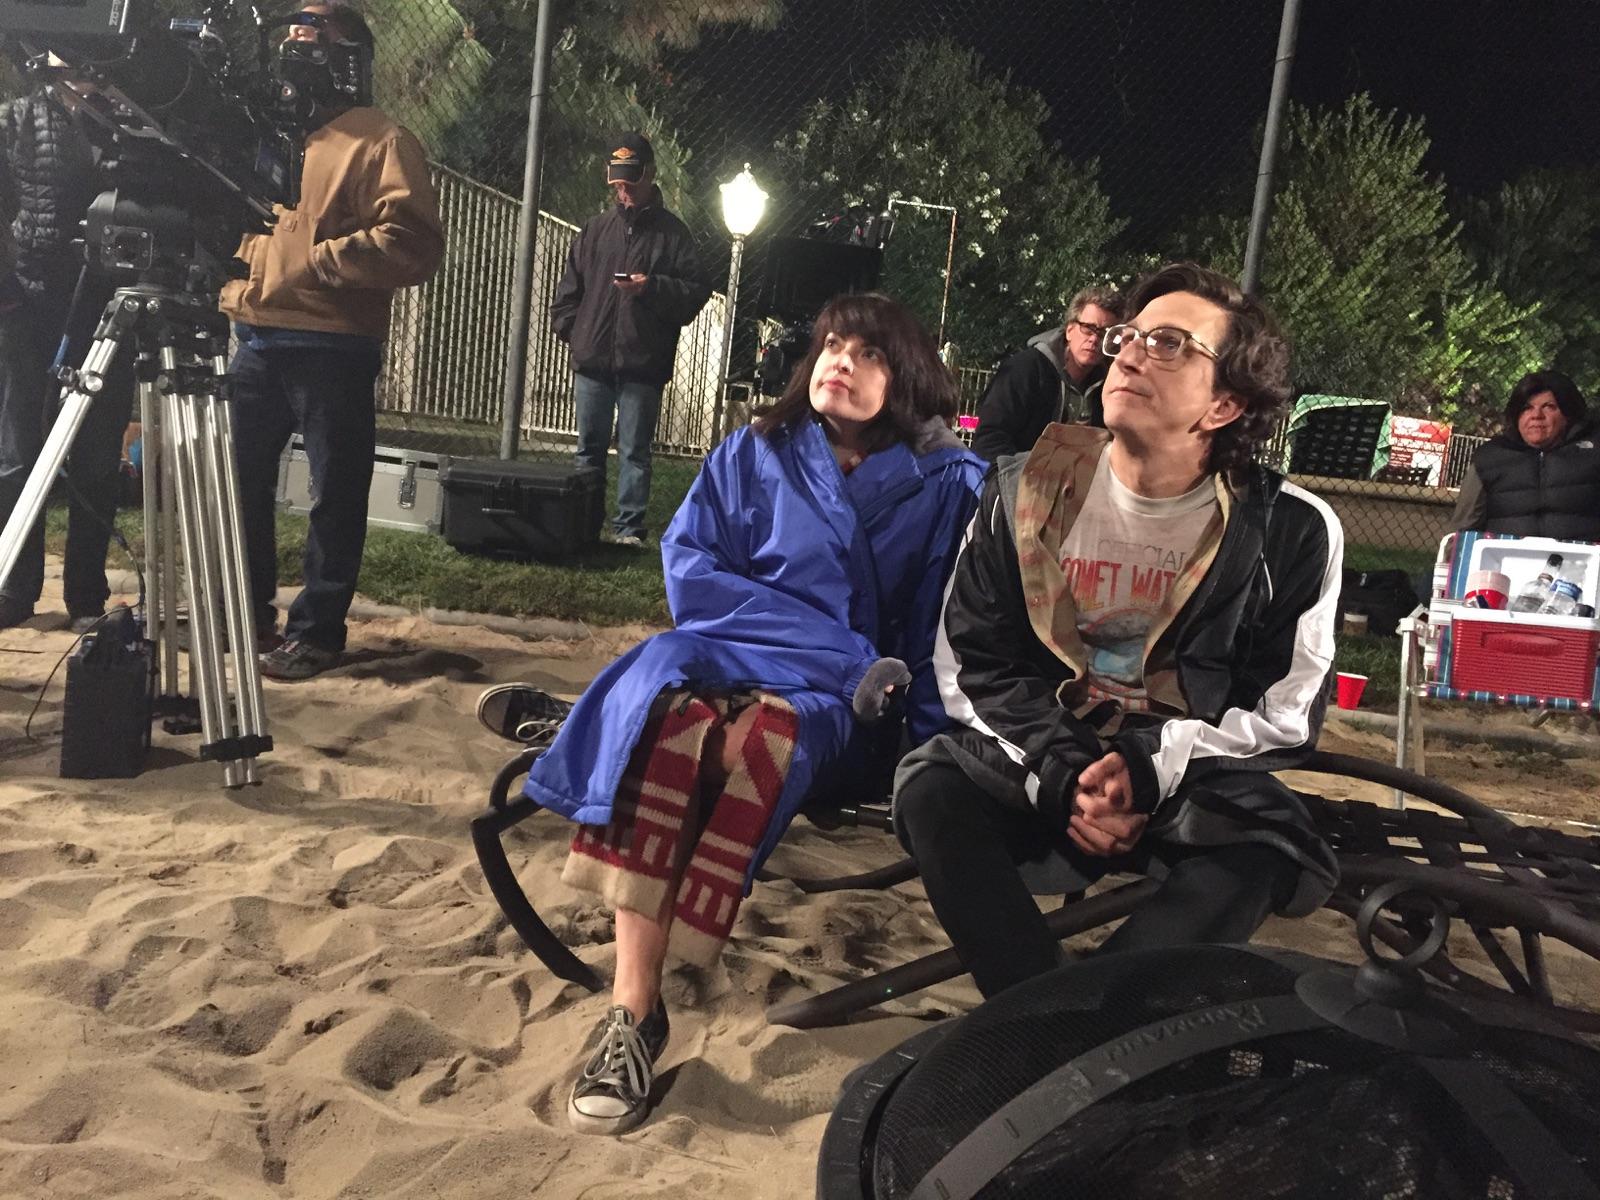 on-set with Paul Rust "Love"